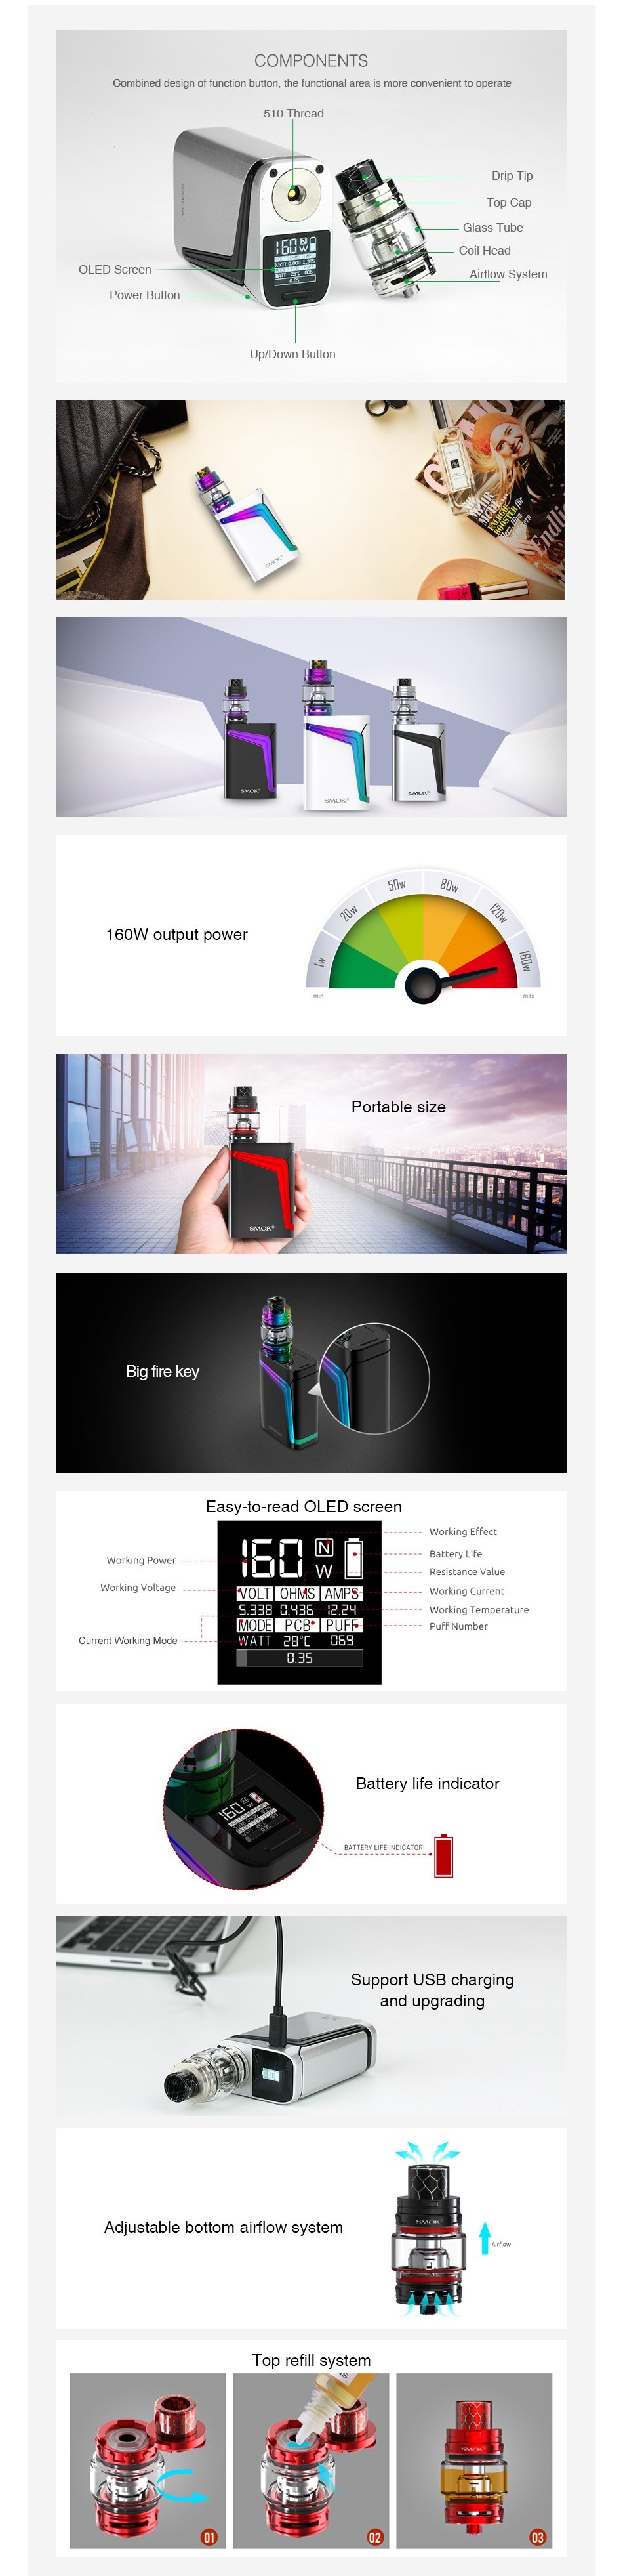 SMOK V-FIN 160W with TFV12 Big Baby Prince TC Kit 8000mAh COMPONENTS Upon Easy to read OLED scree wvorking crage curan votes Support USB charging Adjustable bottom airflow system